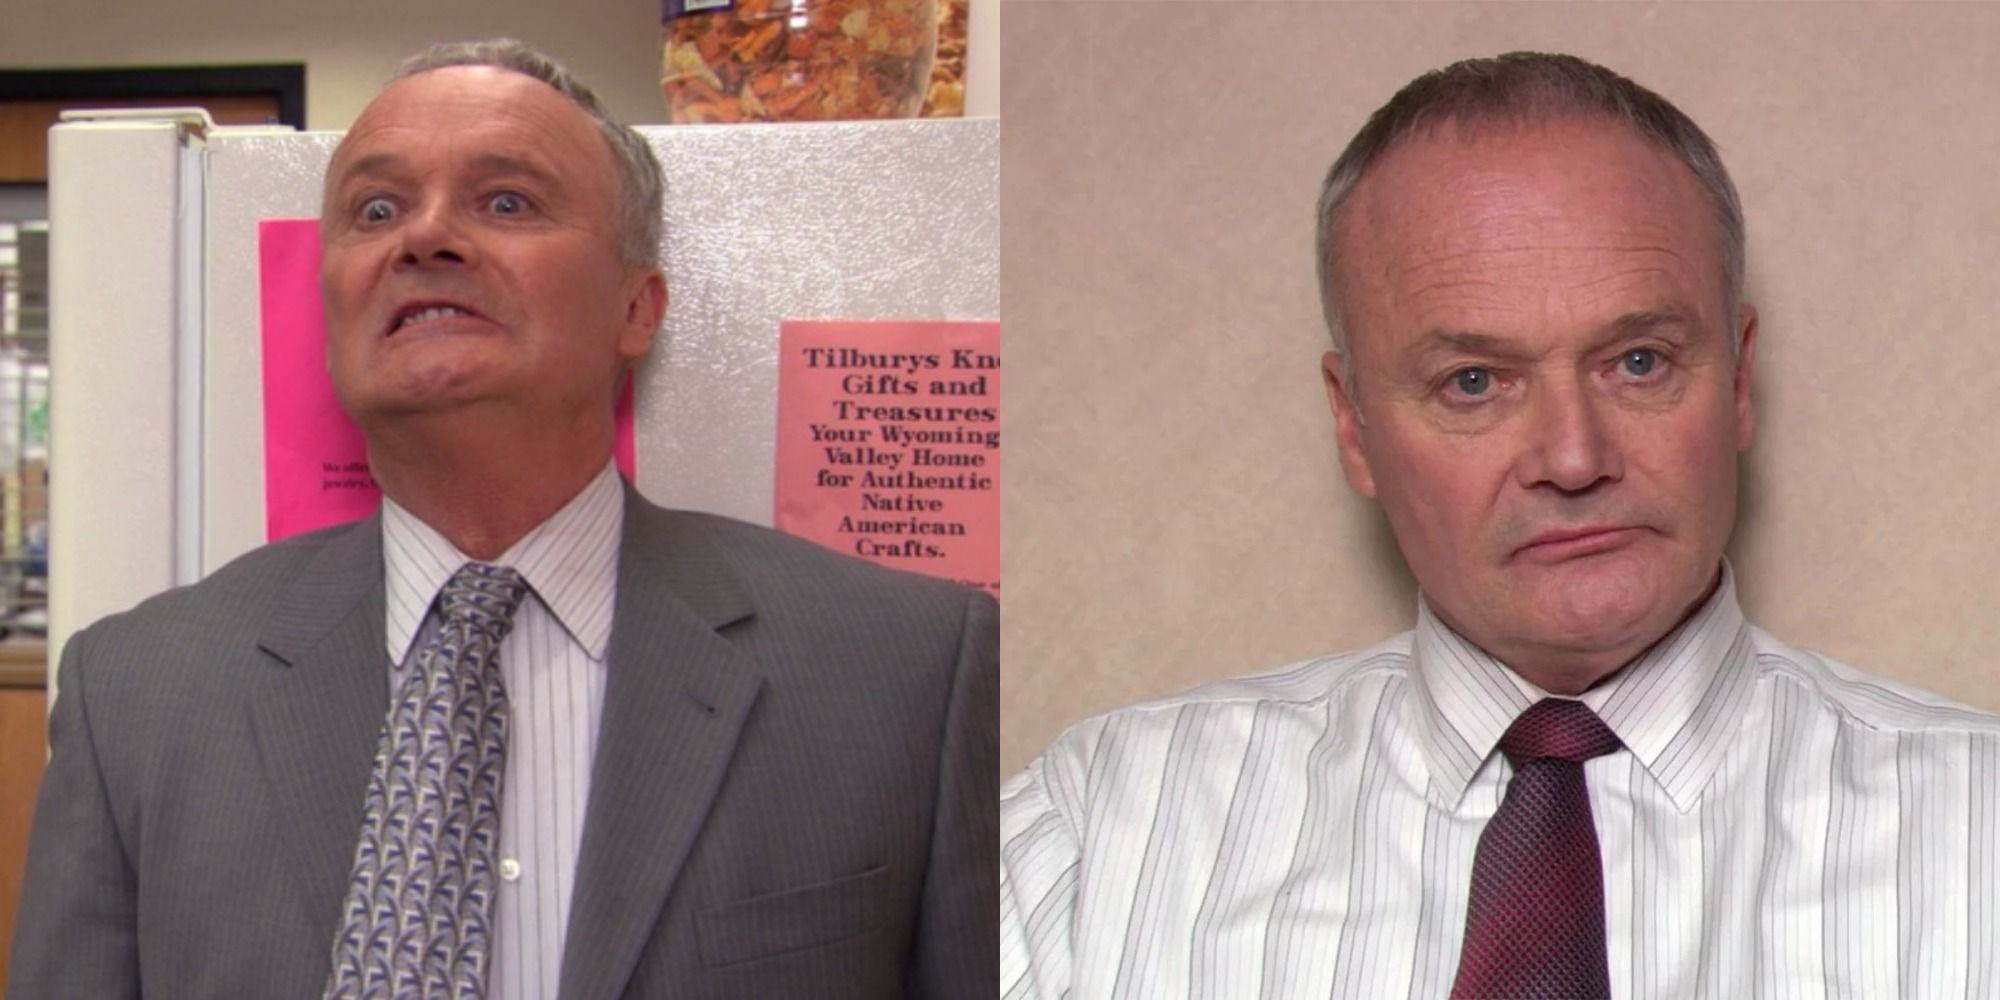 The Office: 5 Creed Quotes That Made Perfect Sense (& 5 That Just Didn't)